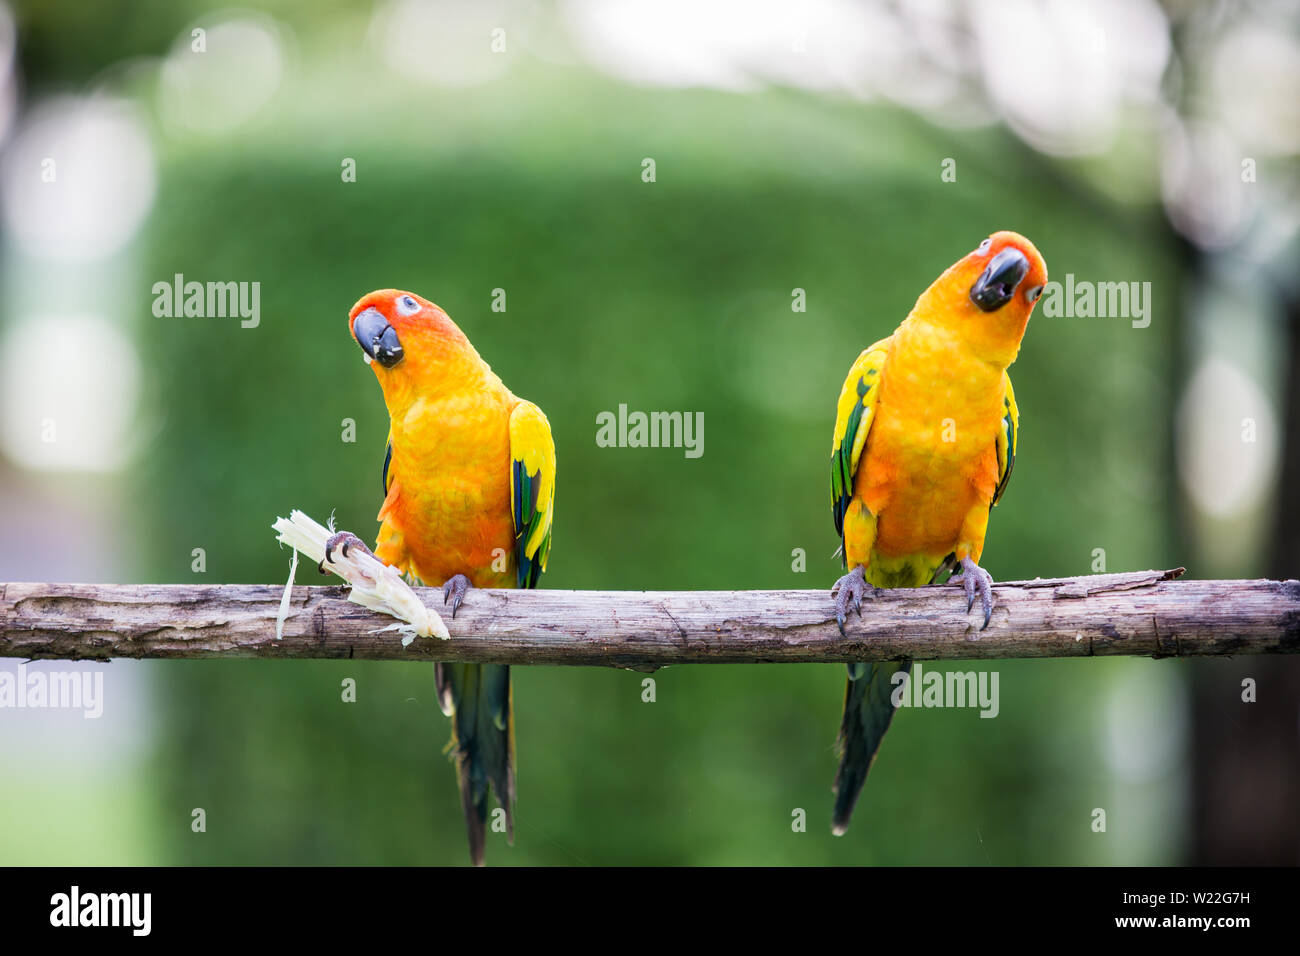 Colorful yellow parrot, Sun Conure (Aratinga solstitialis), standing on the branch Stock Photo